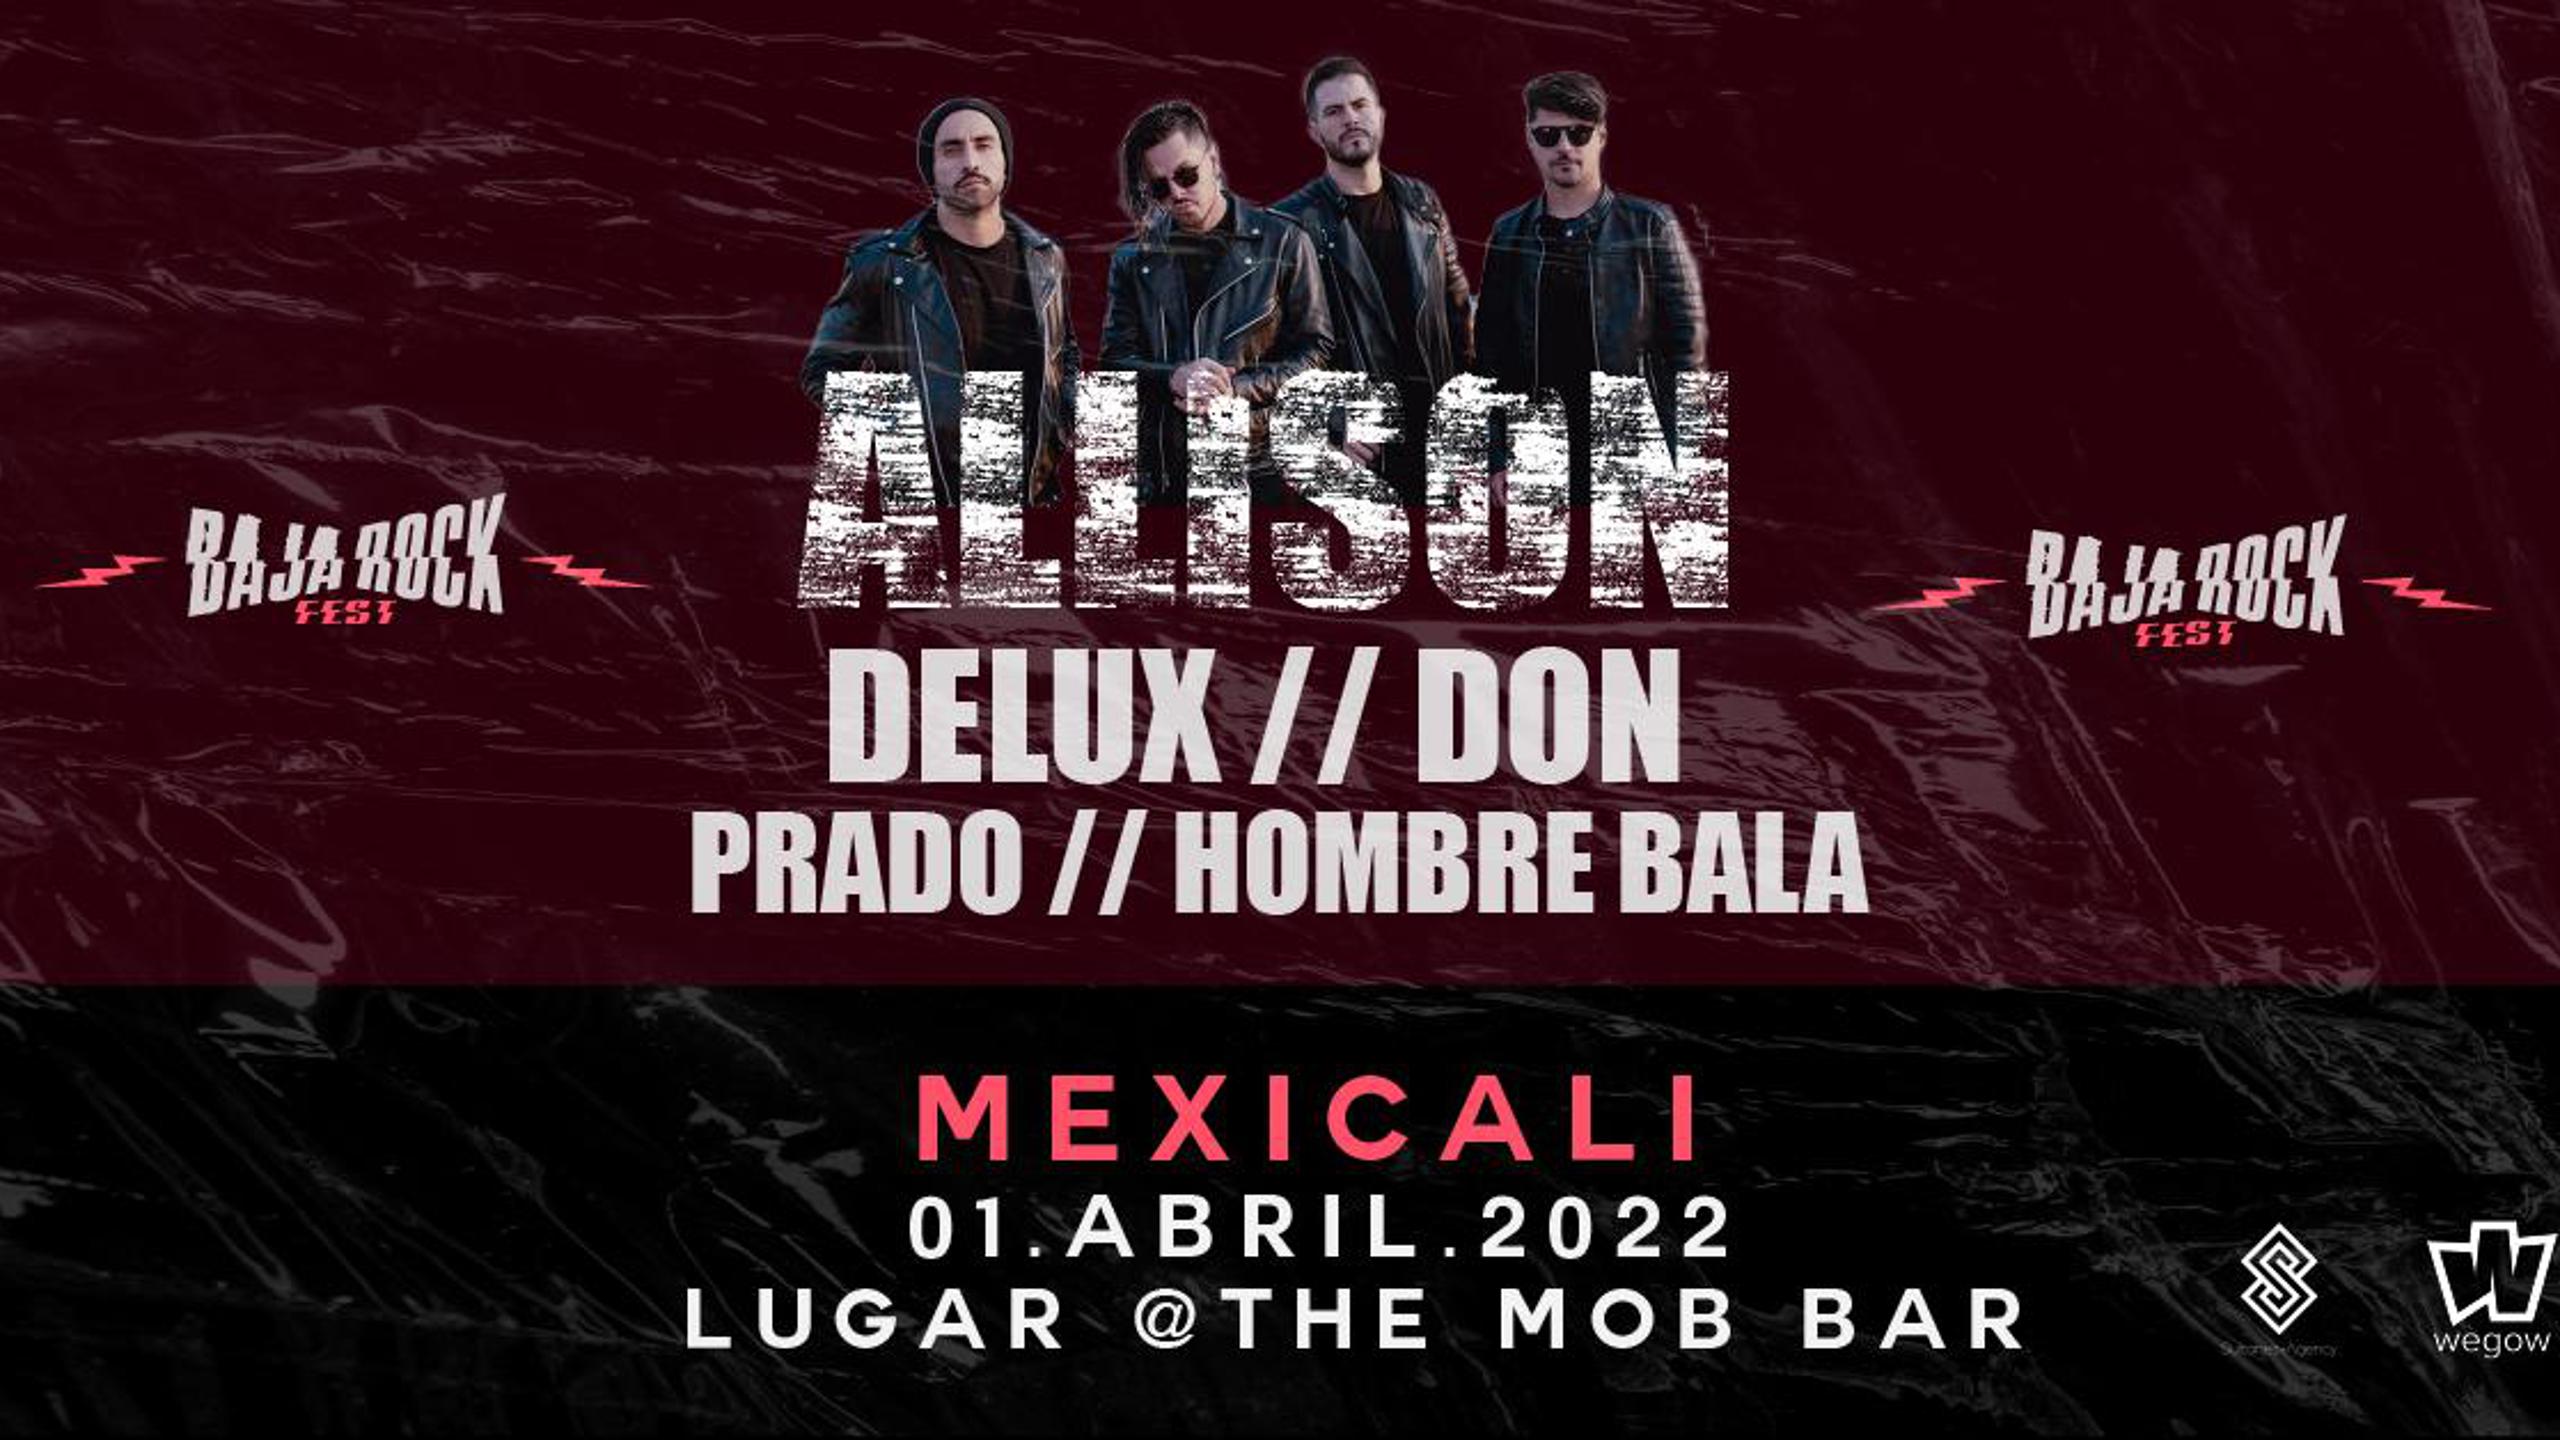 Allison, Canseco, Delux, PRADO concert tickets for The Mob Bar, Mexicali  Friday, 1 April 2022 | Wegow United States